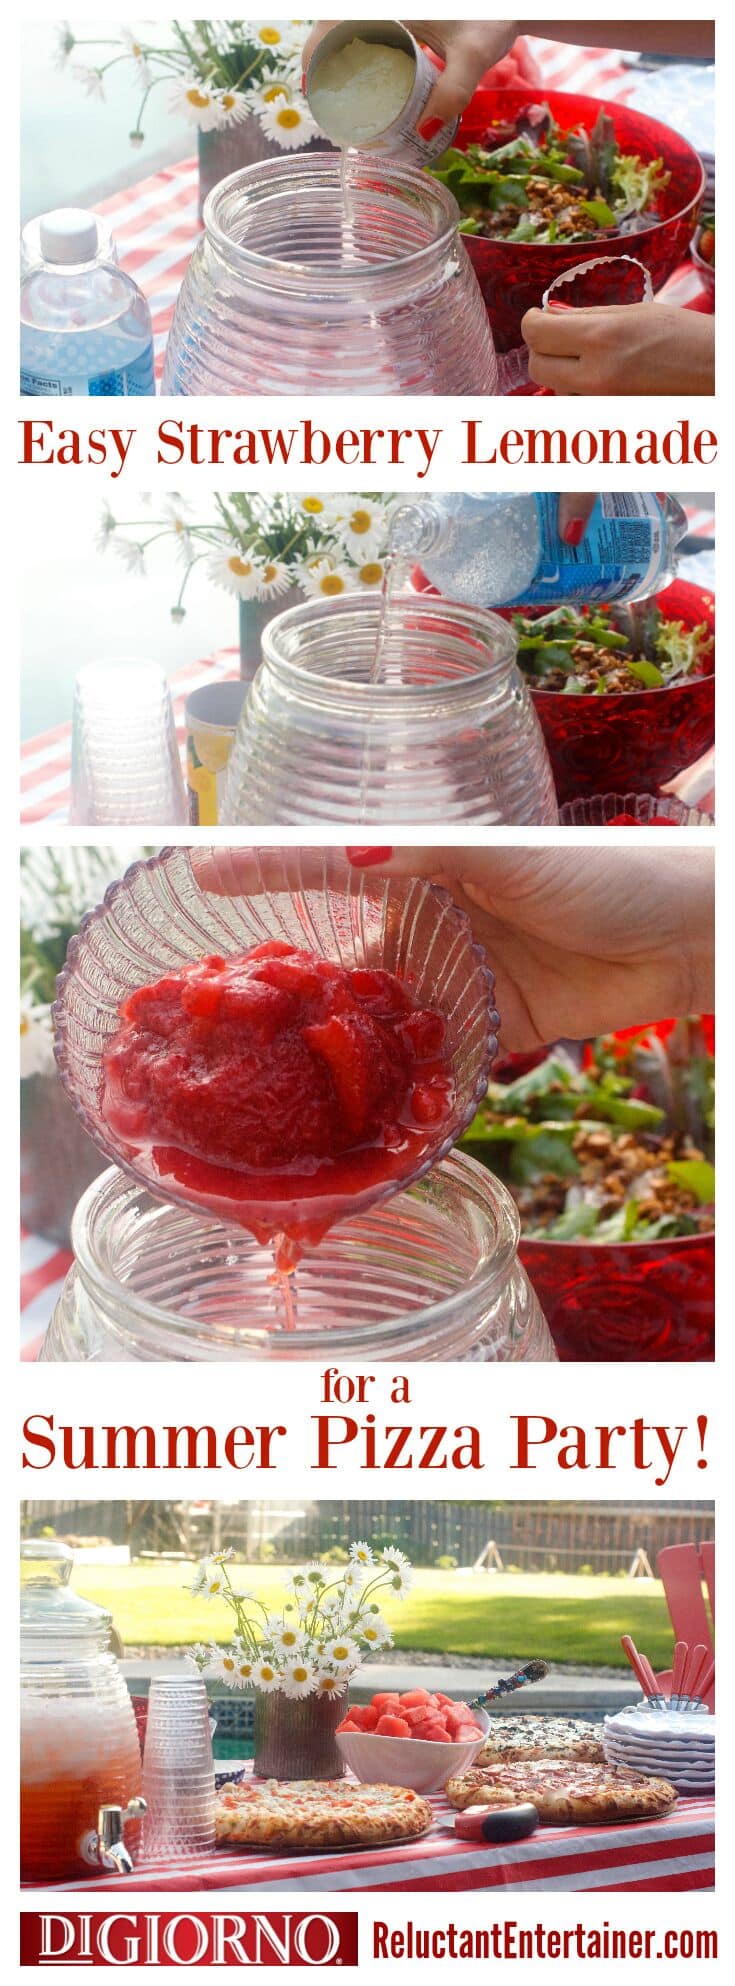 Easy Strawberry Lemonade for a summer pizza party! at ReluctantEntertainer.com